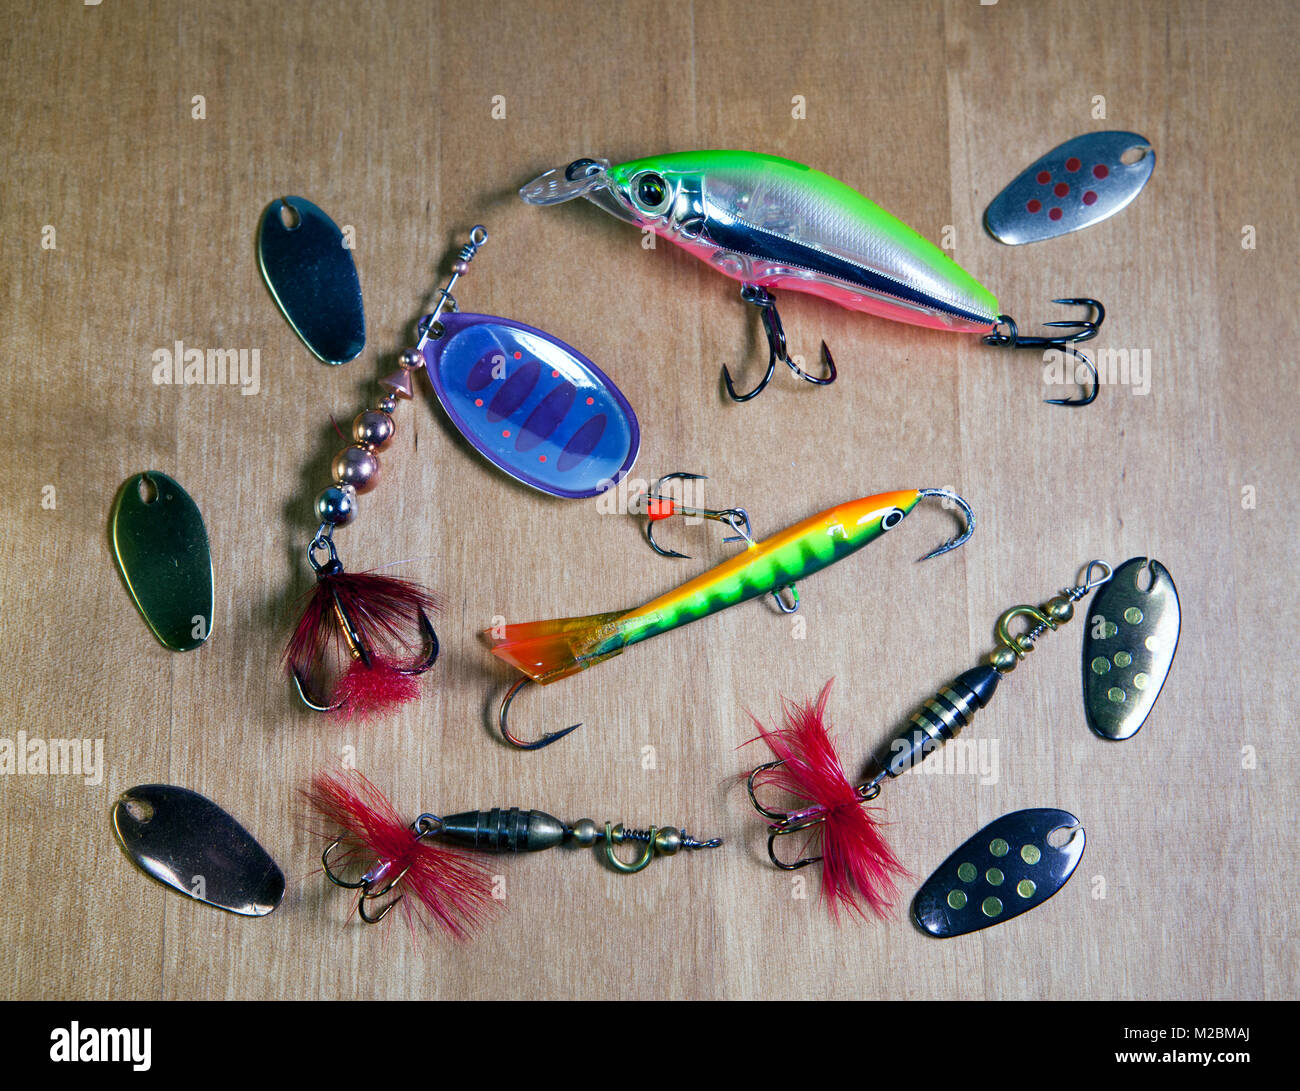 Beaver Flick fishing lures from the The Beaver House in Grand